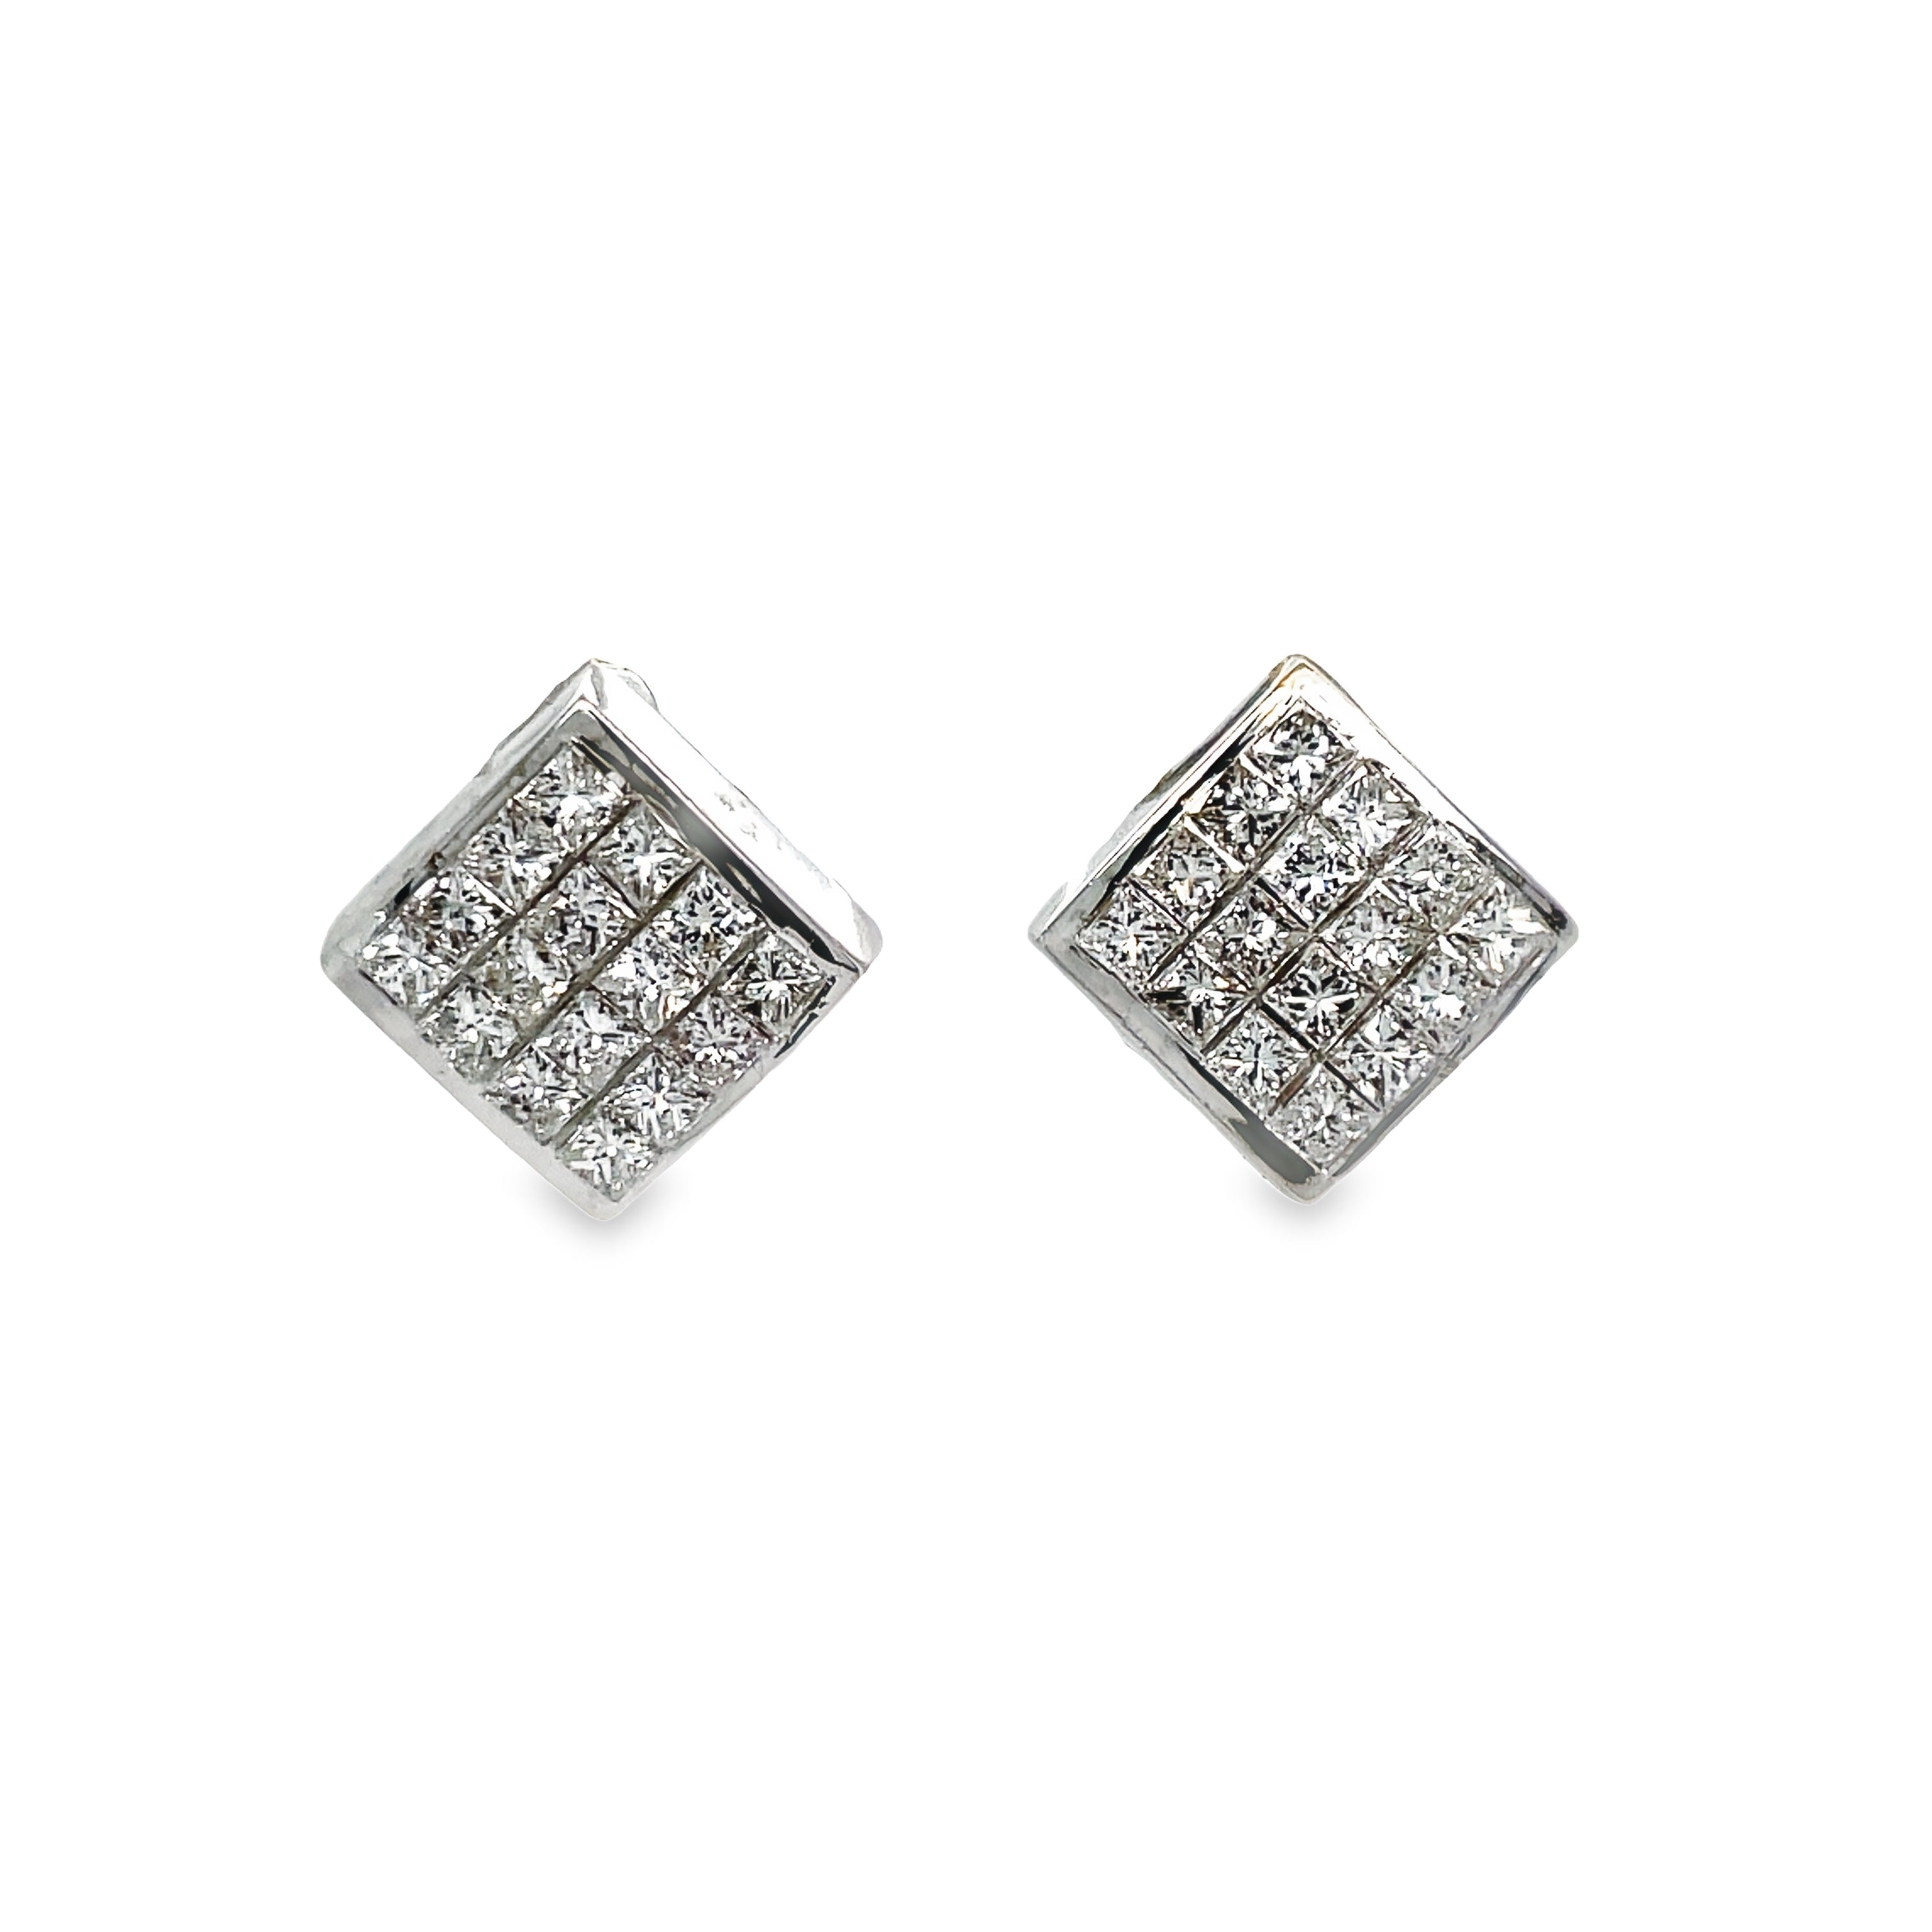 Elevate your style with our 18k Princess Cut Diamond Square Earrings. Made with 18k white gold, these earrings feature a secure omega clip for maximum comfort. The square style adds a modern touch, while the diamond princess cut look boasts 1.45 cts of pure elegance. Make a statement with these stunning earrings!